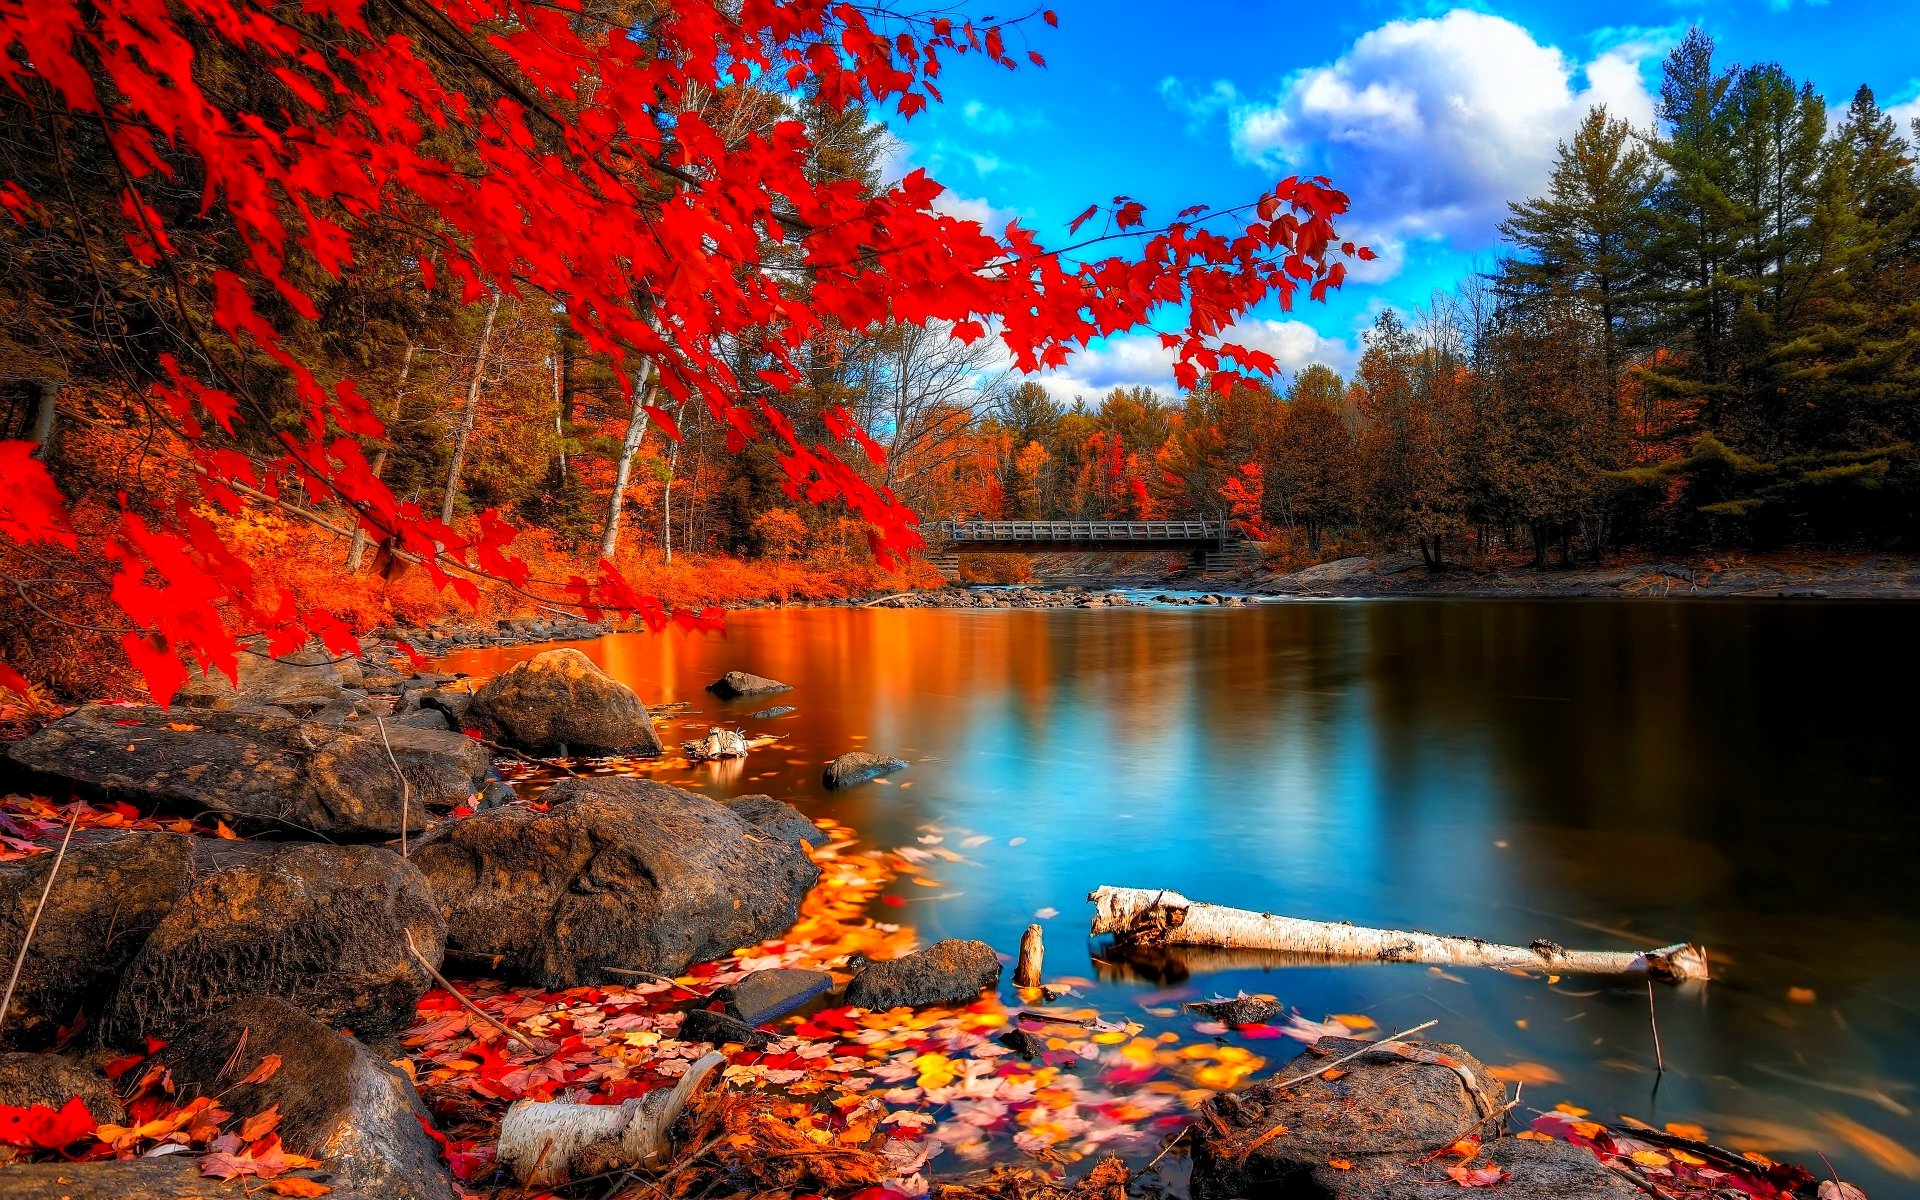 Colorful Nature Landscape Wallpapers